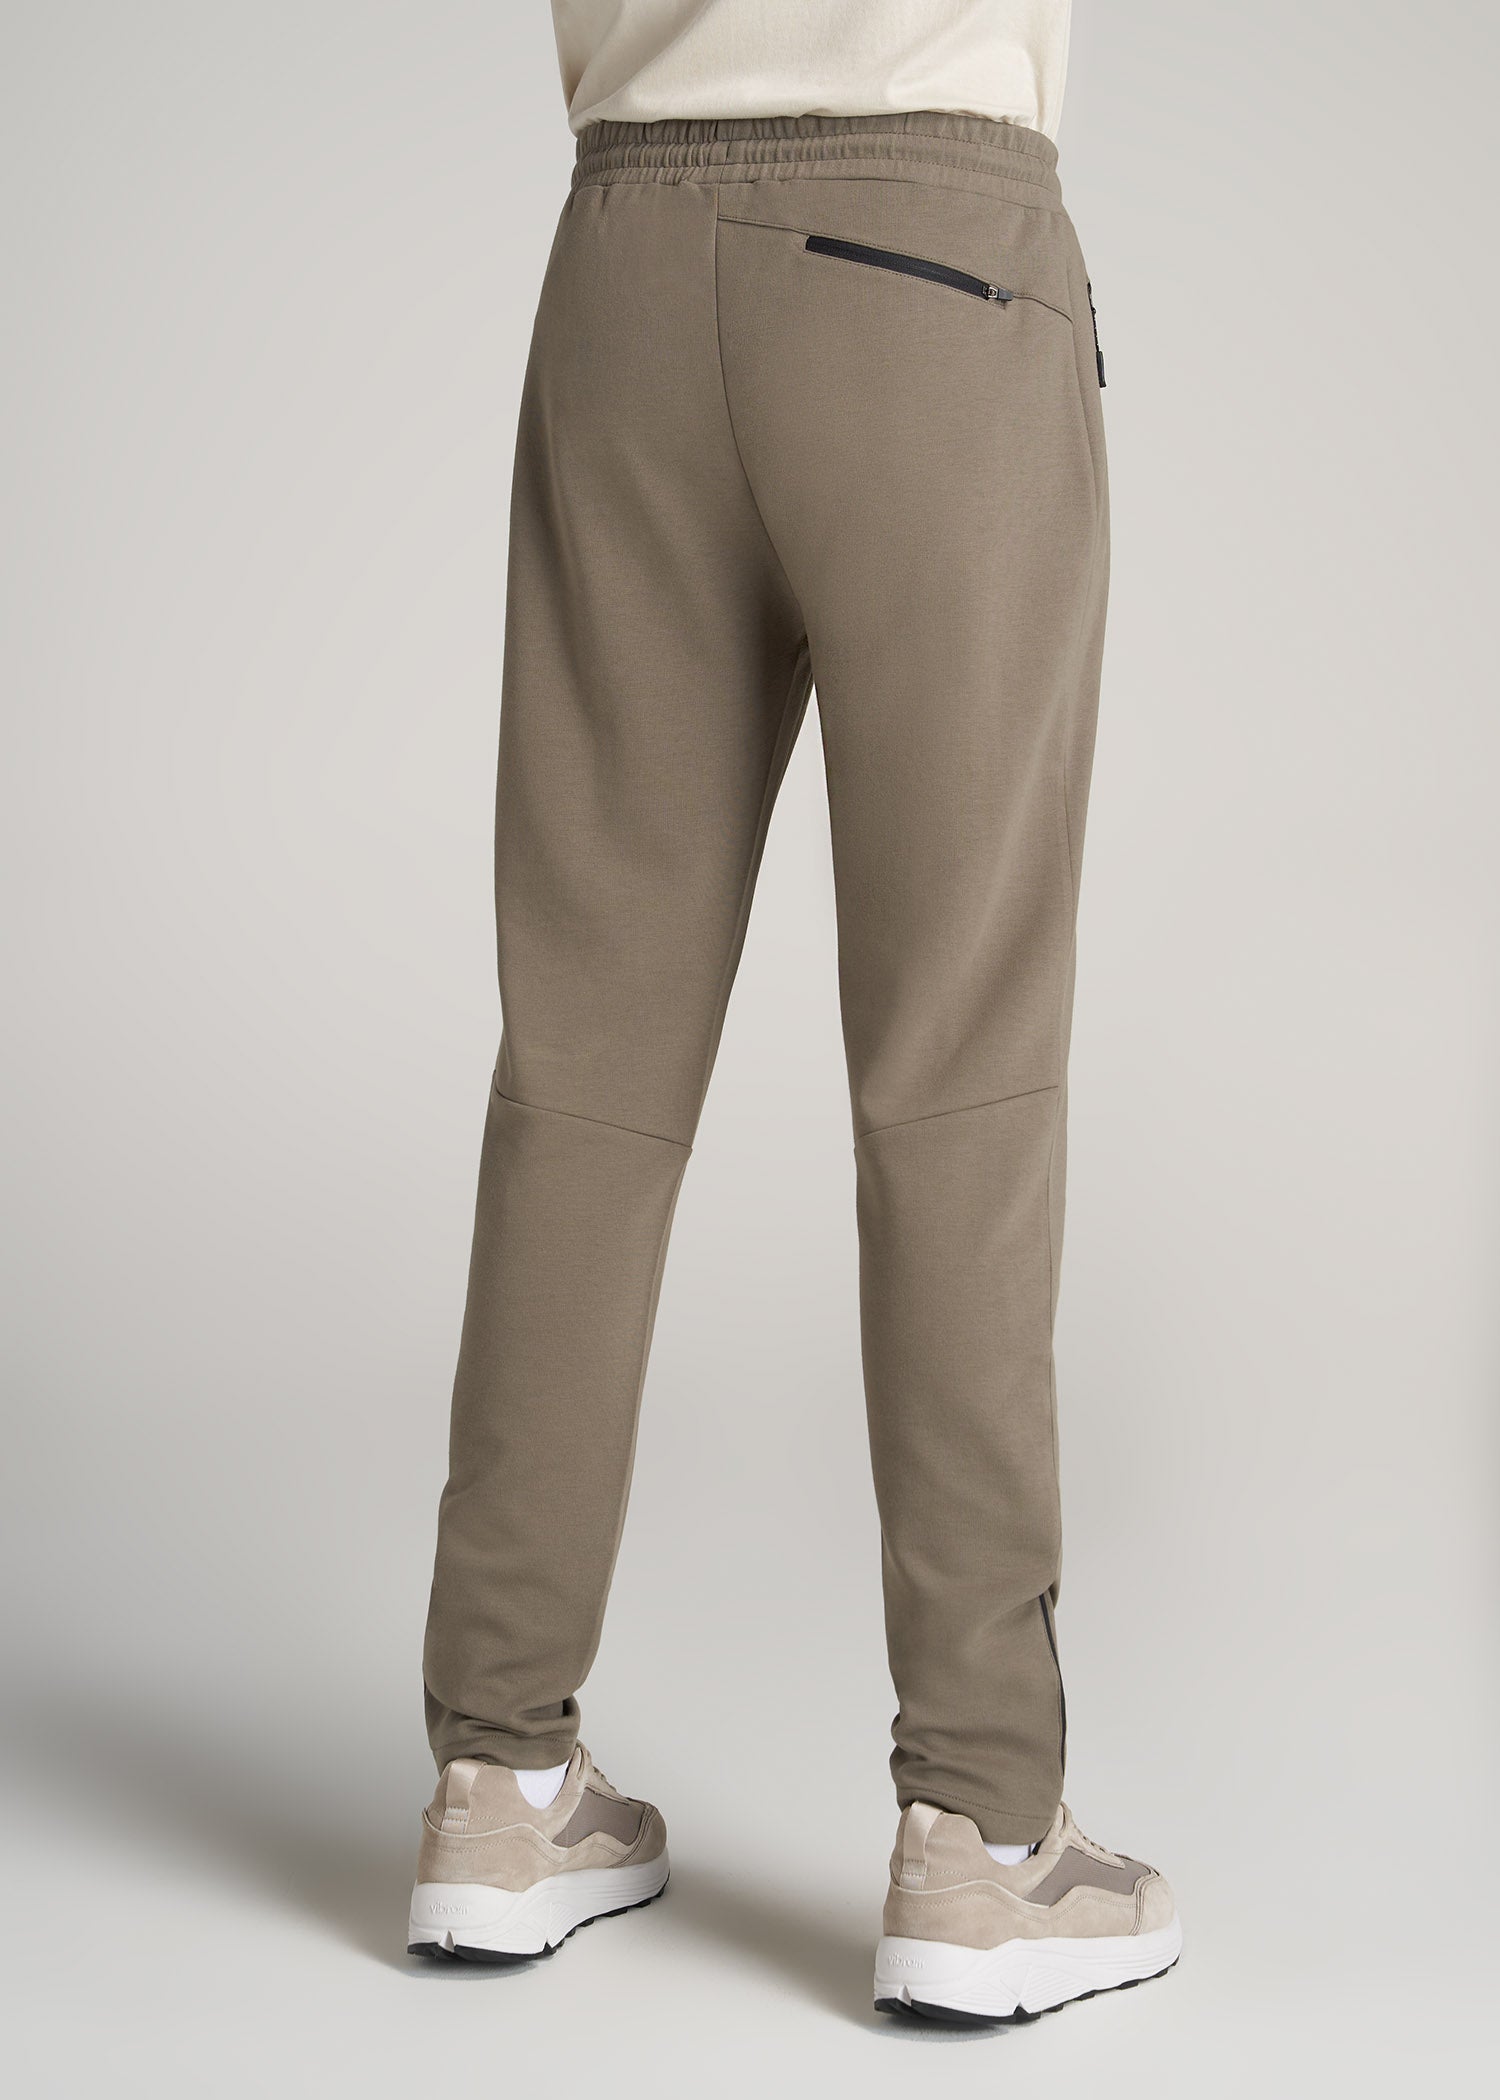    American-Tall-Men-Athleisure-Performance-Pant-Deep-Taupe-back